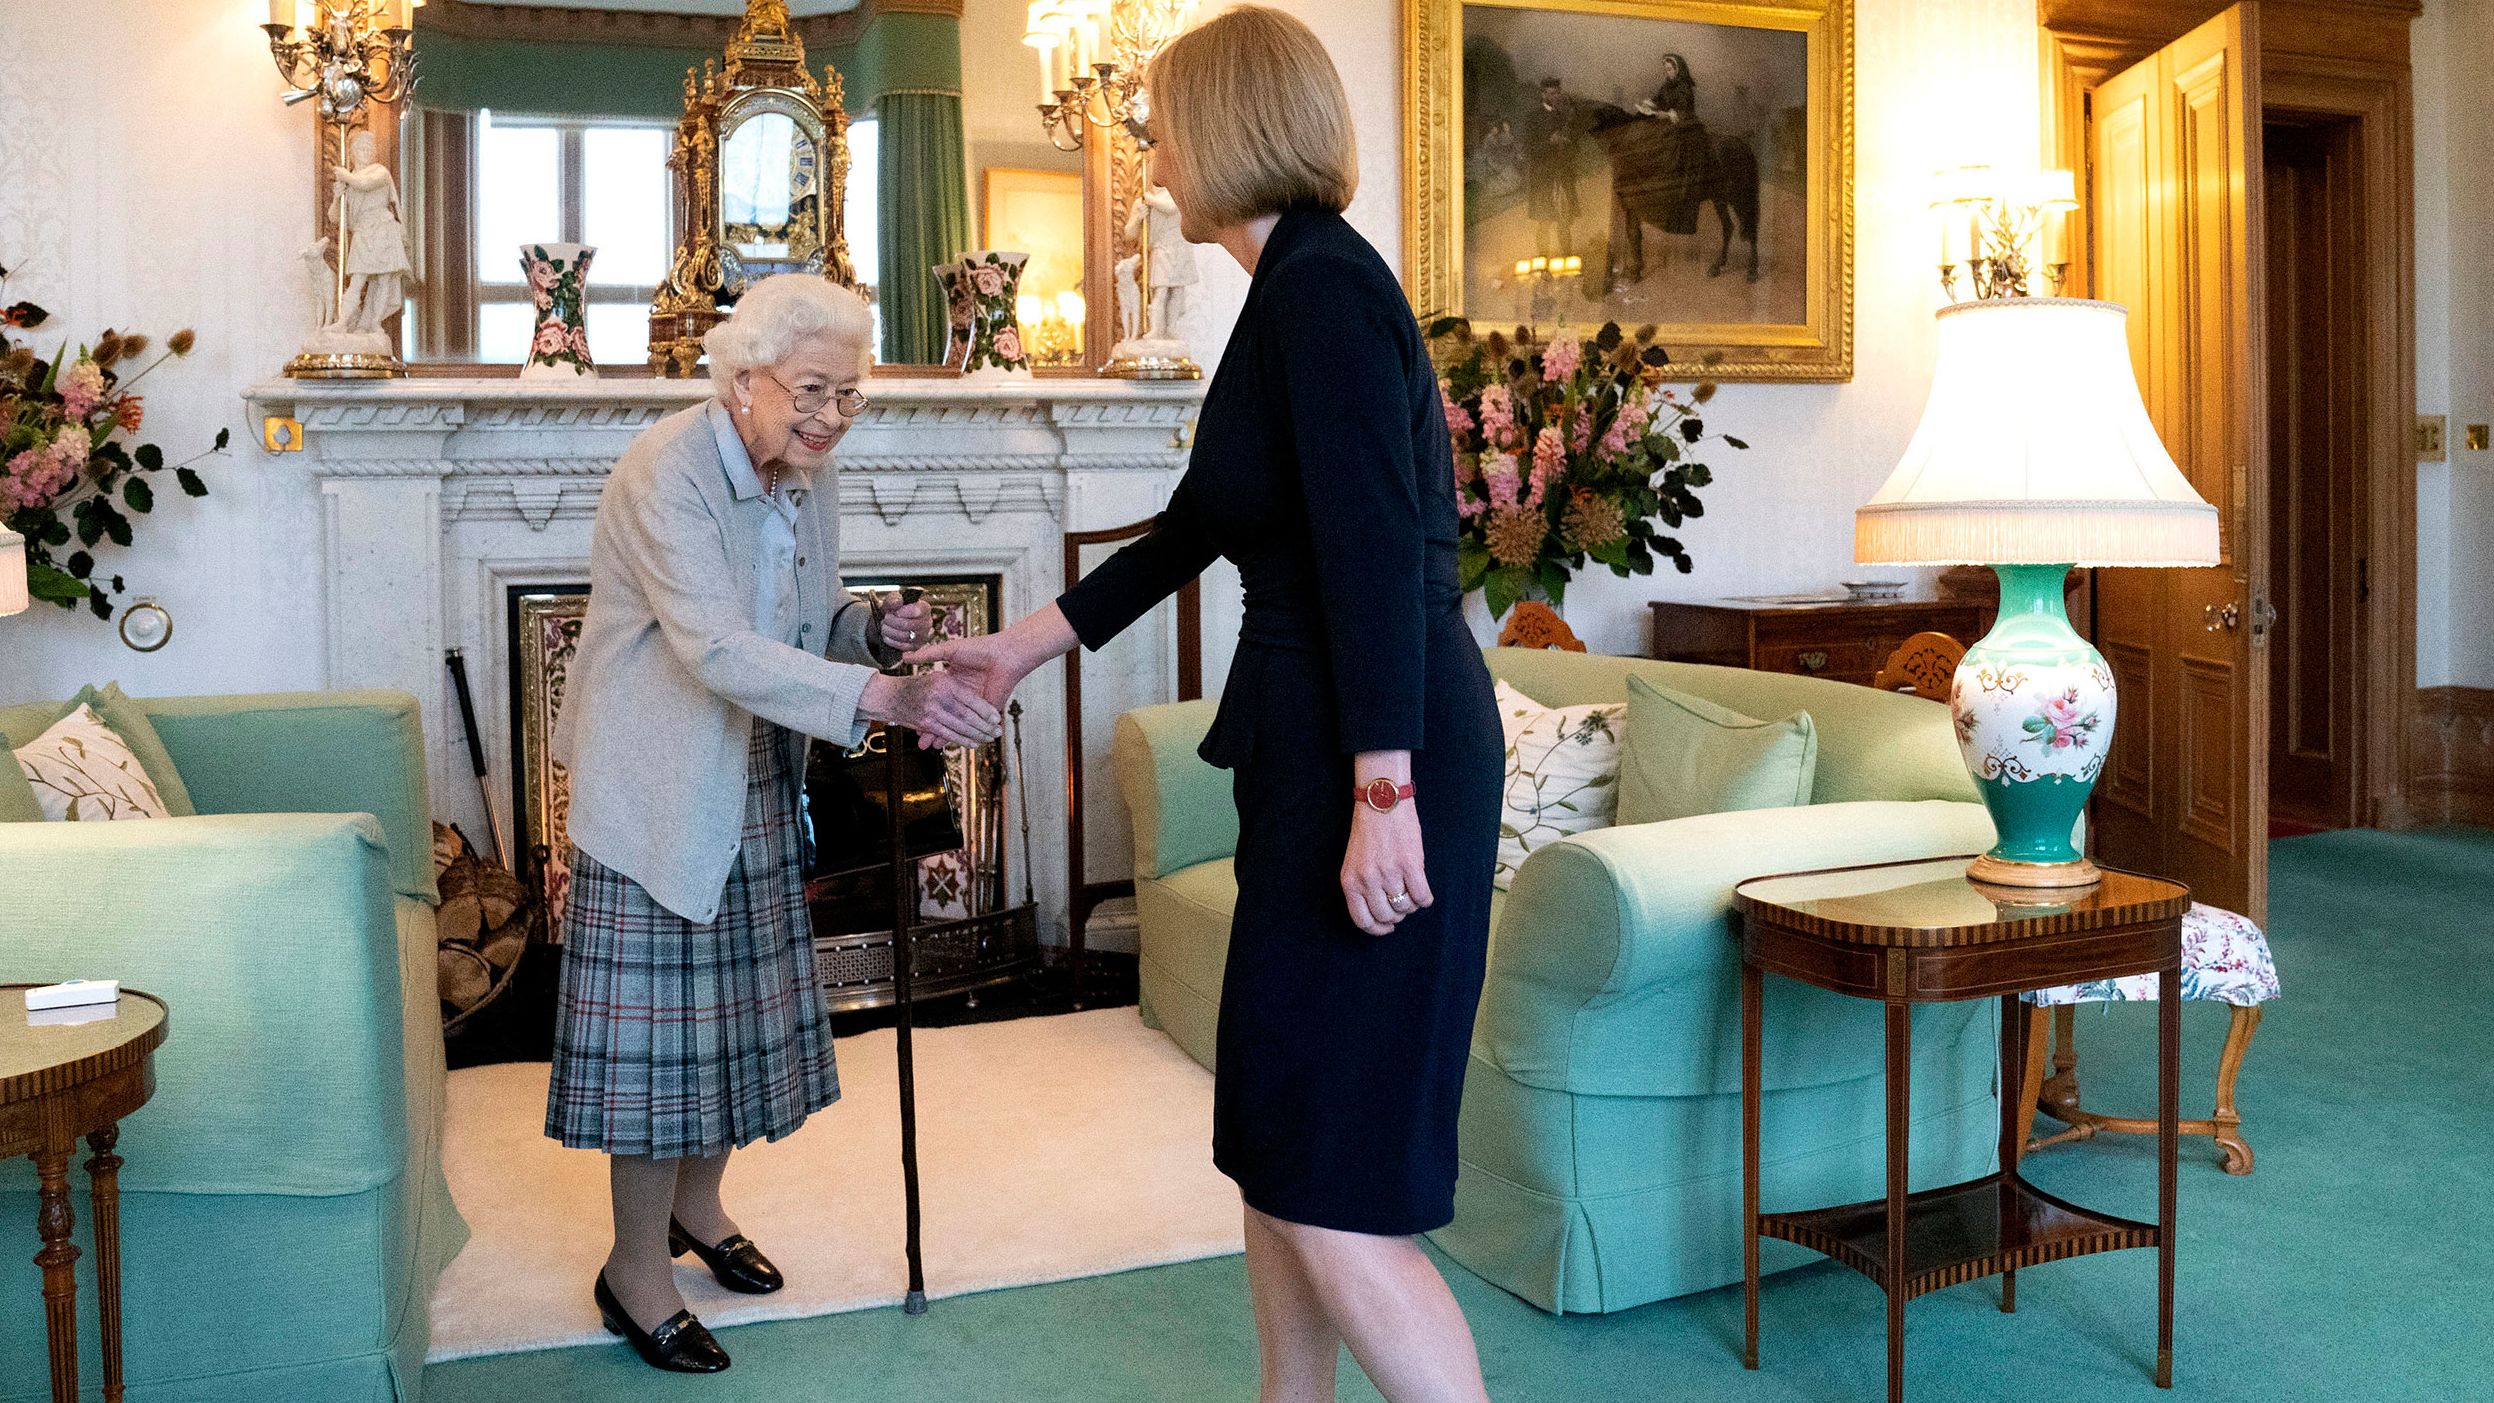 Britain's Queen Elizabeth II welcomes Liz Truss at Scotland's Balmoral Castle on Tuesday, September 6. The Queen invited Truss to become prime minister and form a new government.